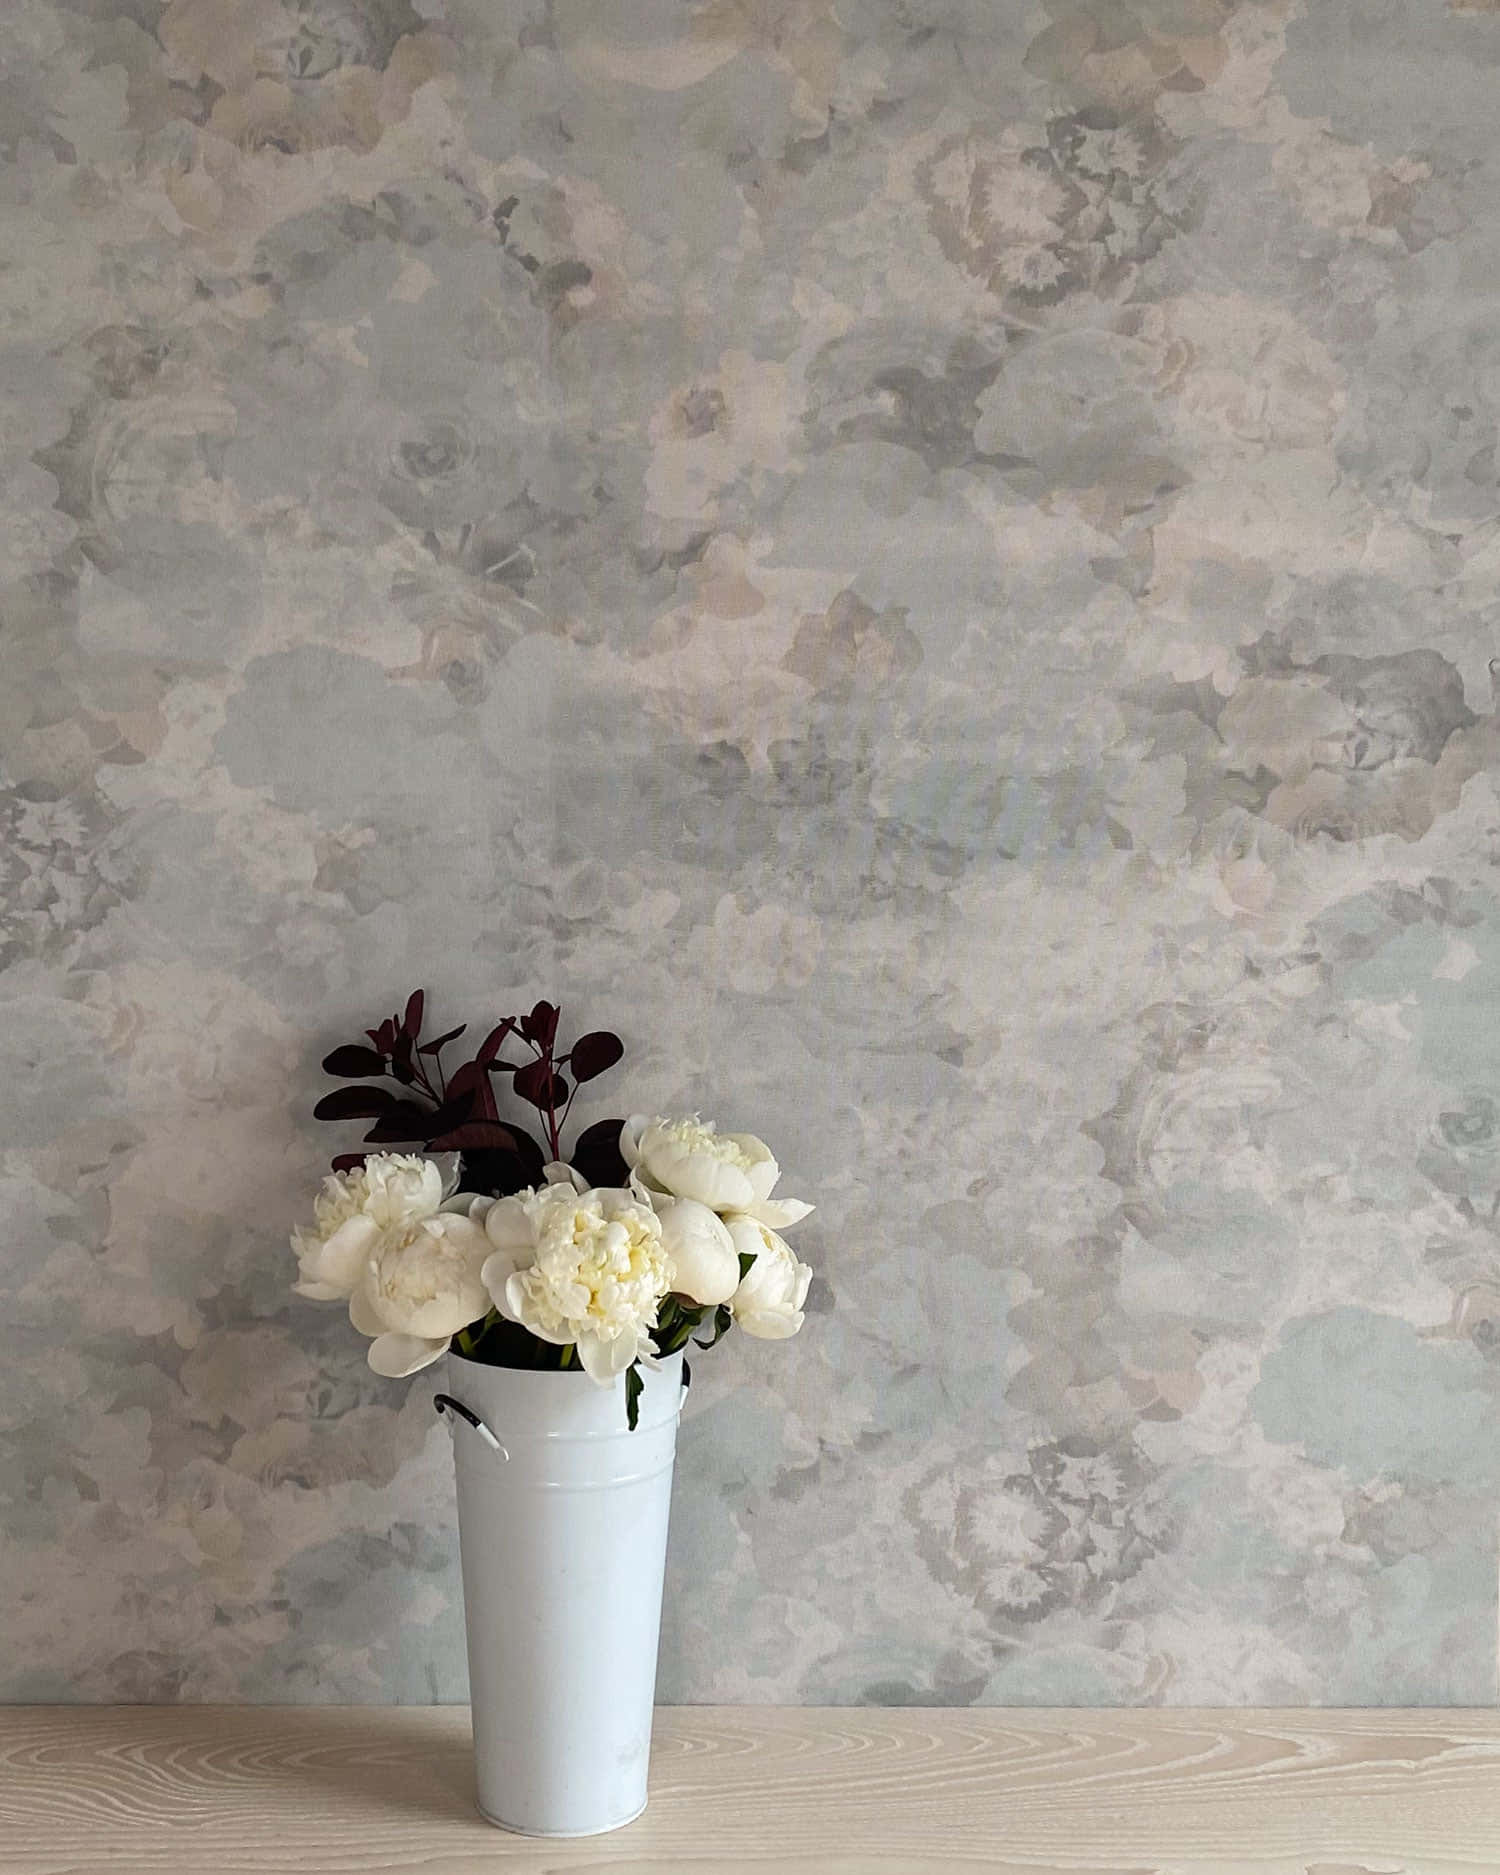 Vase Full Of Flowers With A Perennial Smell Wallpaper